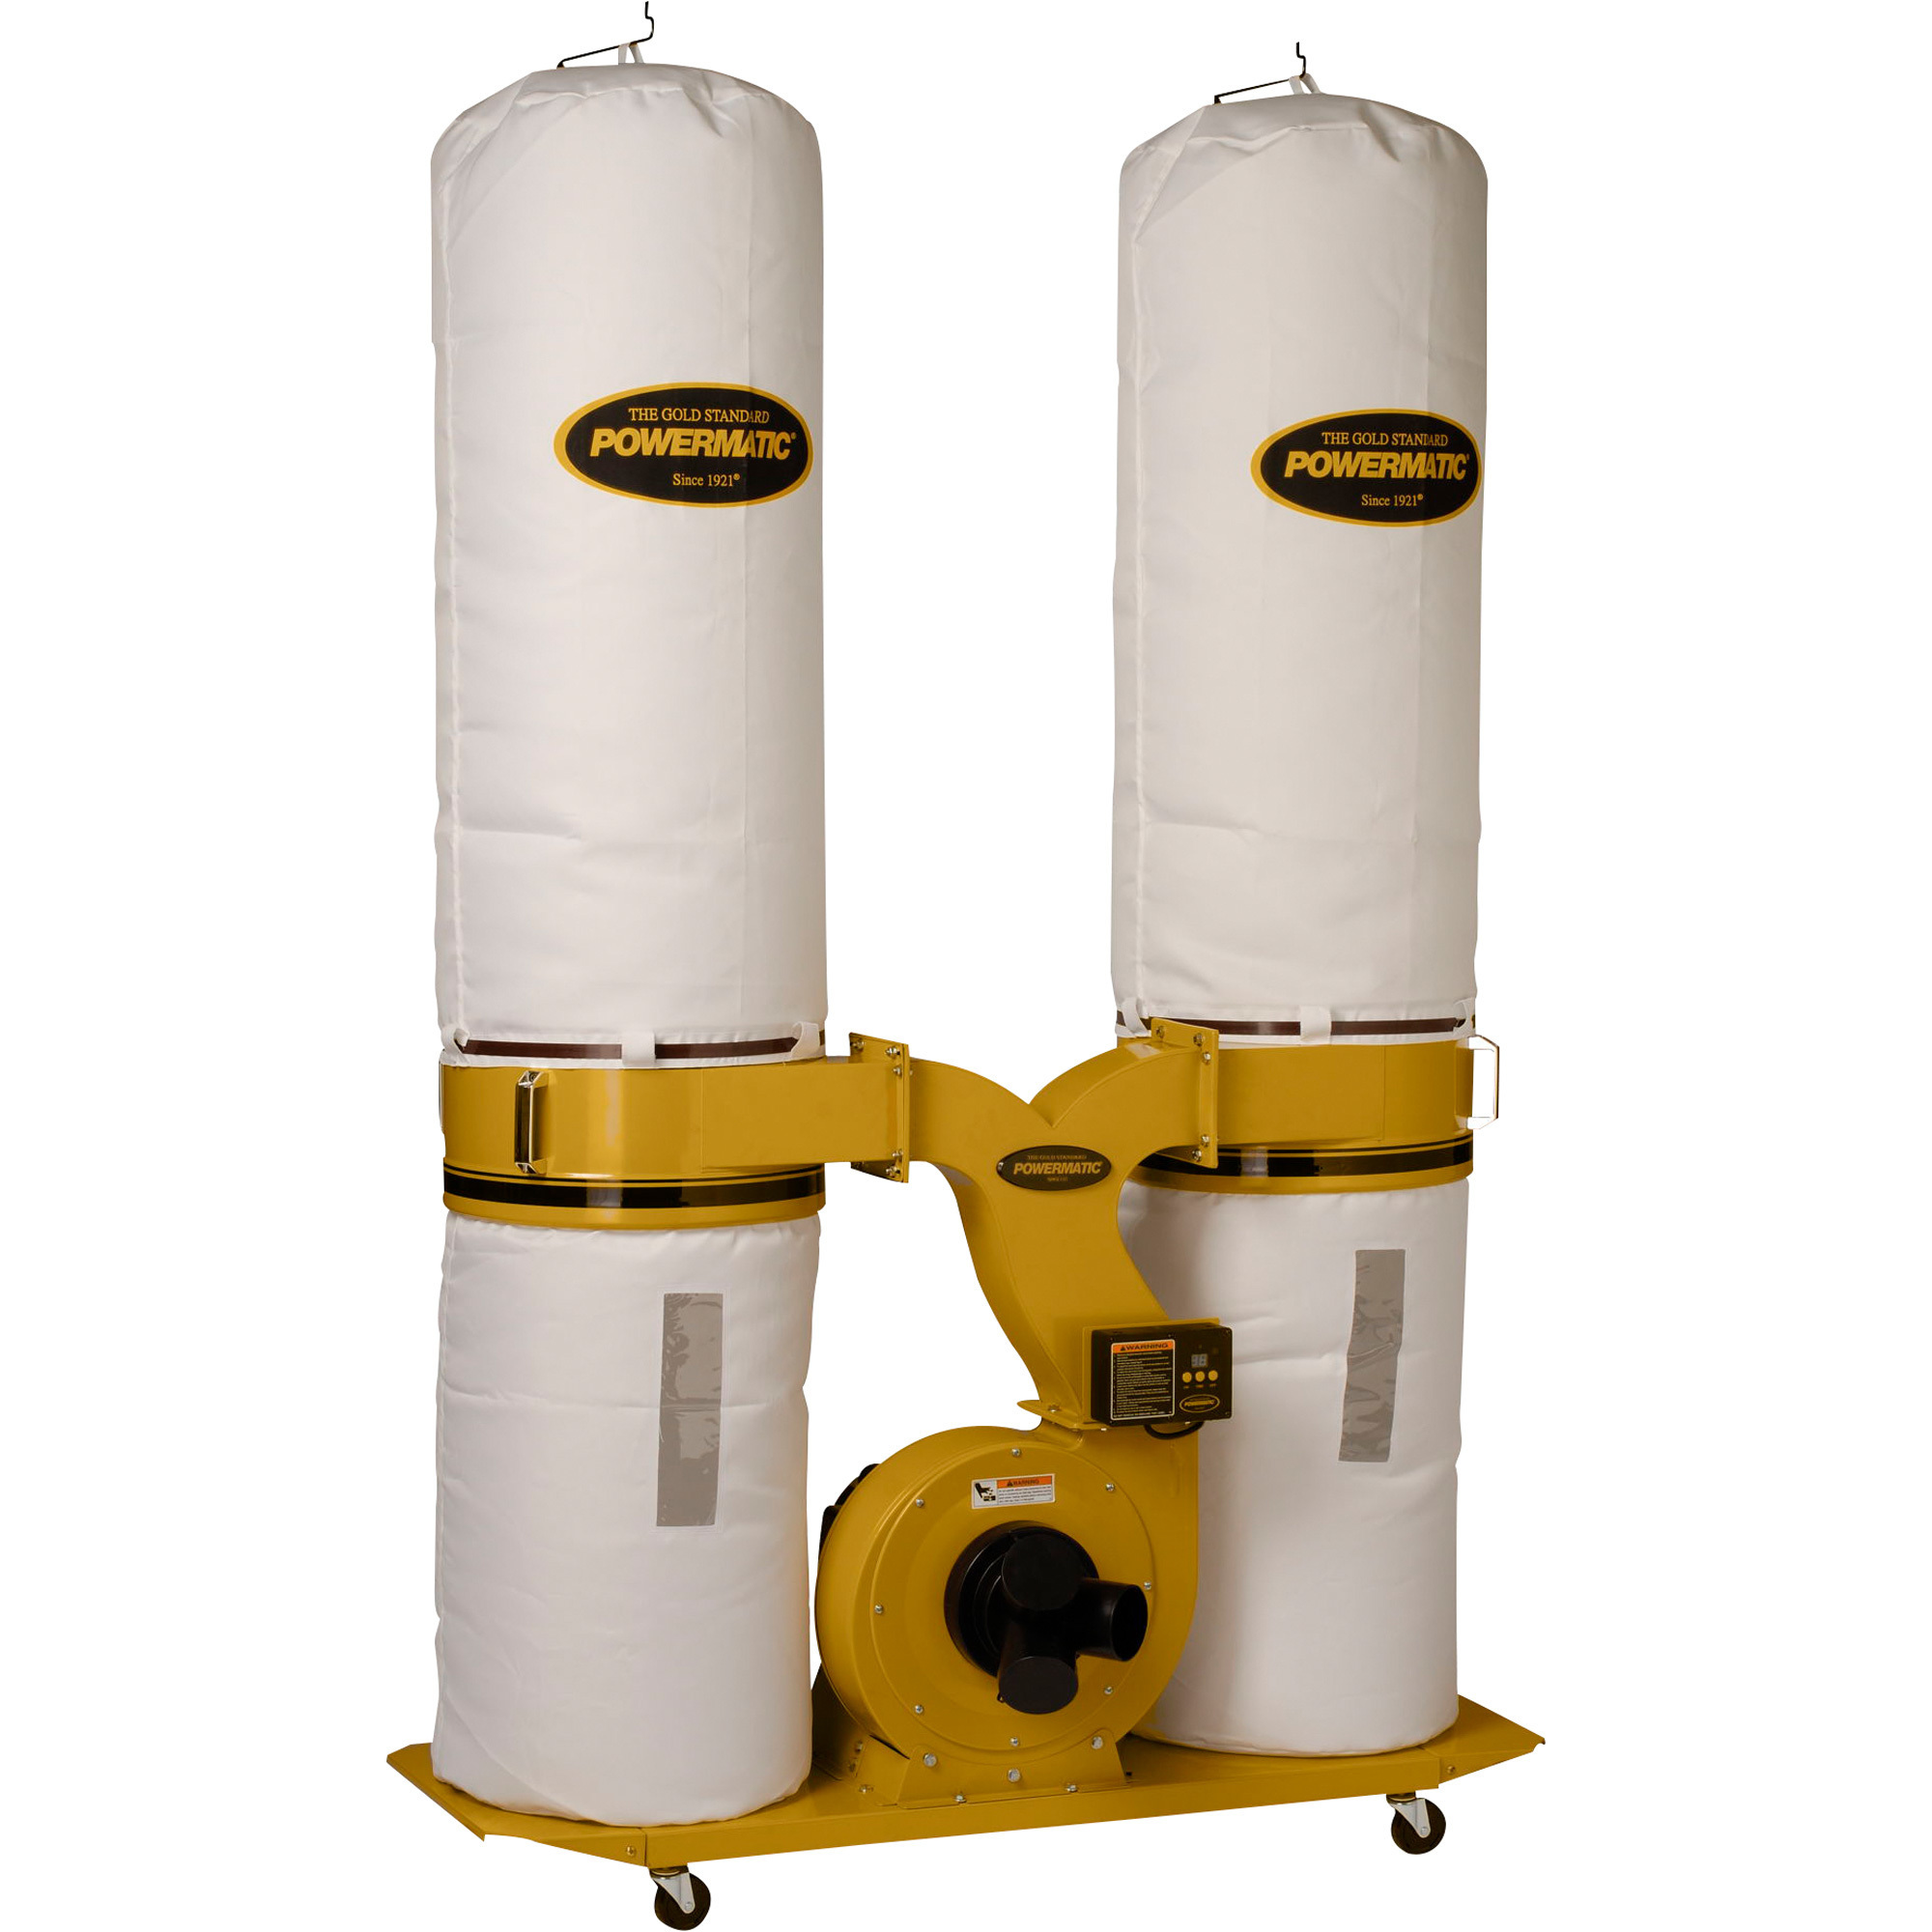 Powermatic Dust Collector with TurboCone, 3 HP, 1 PH, 230V, 30-Micron Bag Filter Kit, Model PM1900